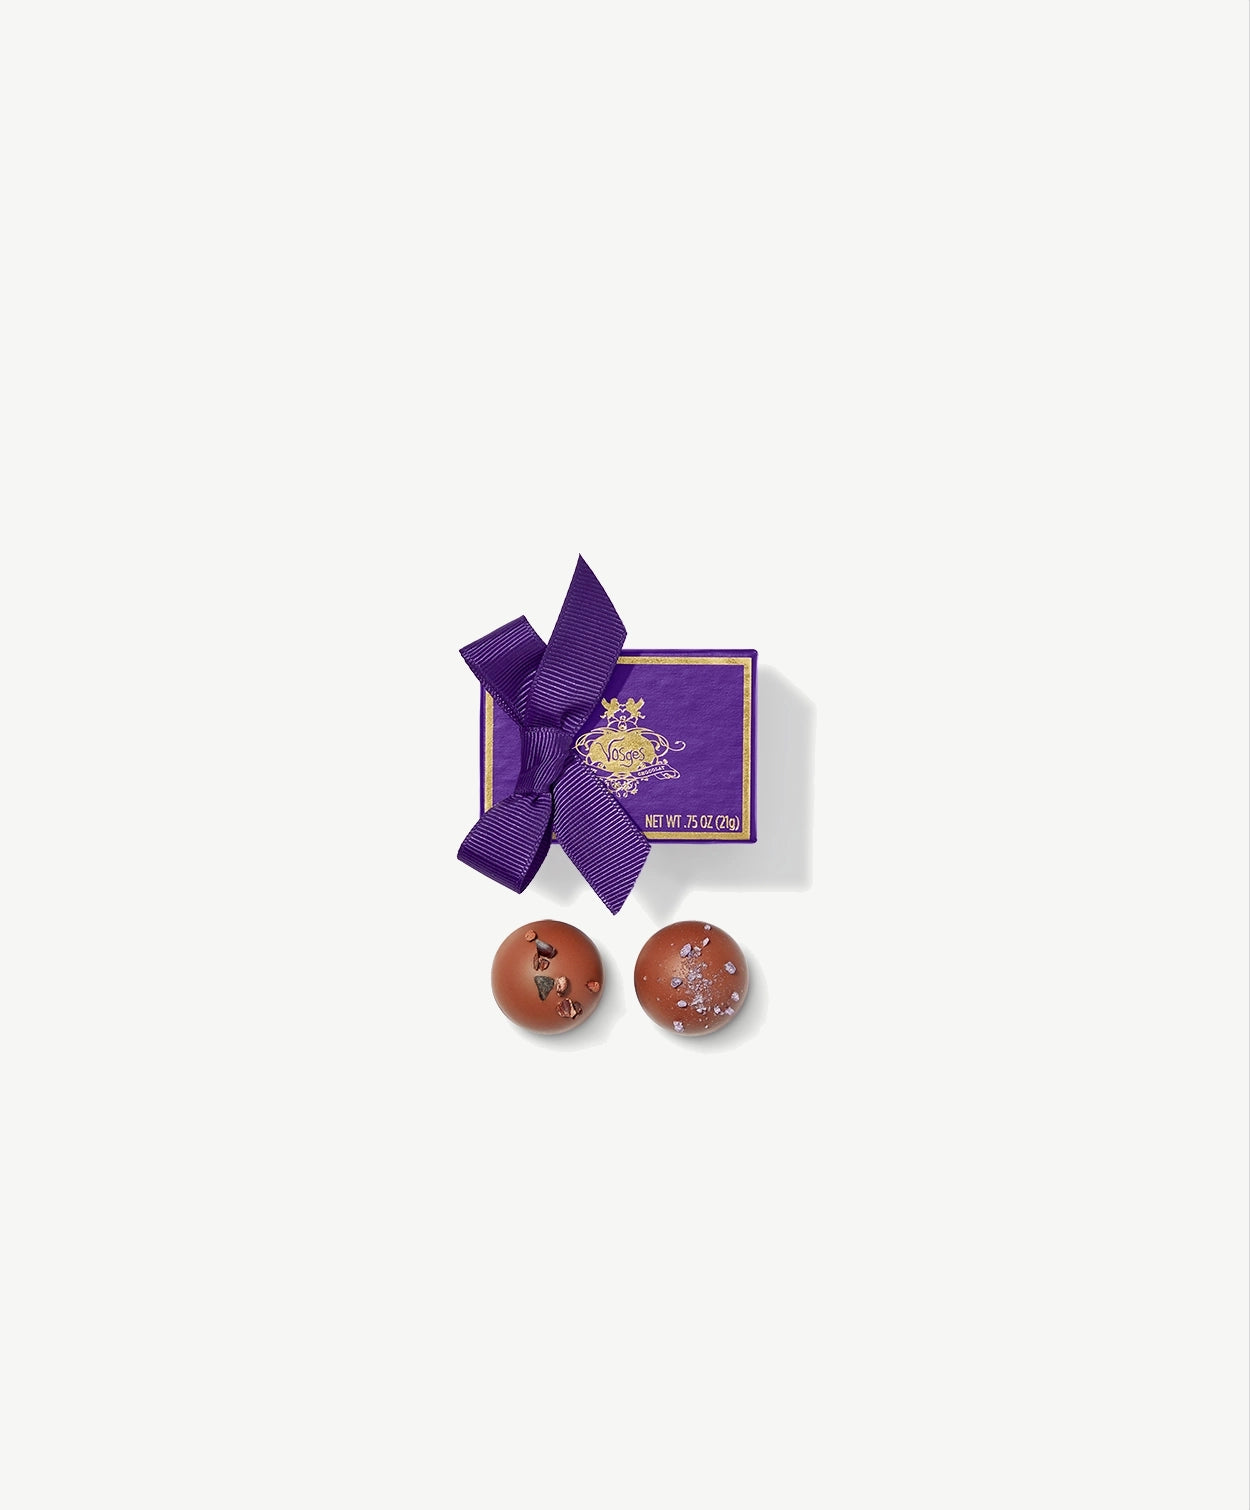 Two Vosges Praline Truffles adorned with Piemonte hazelnuts and candied violet sit side by side in-front a small purple candy box tied with a purple ribbon bow on a grey background.